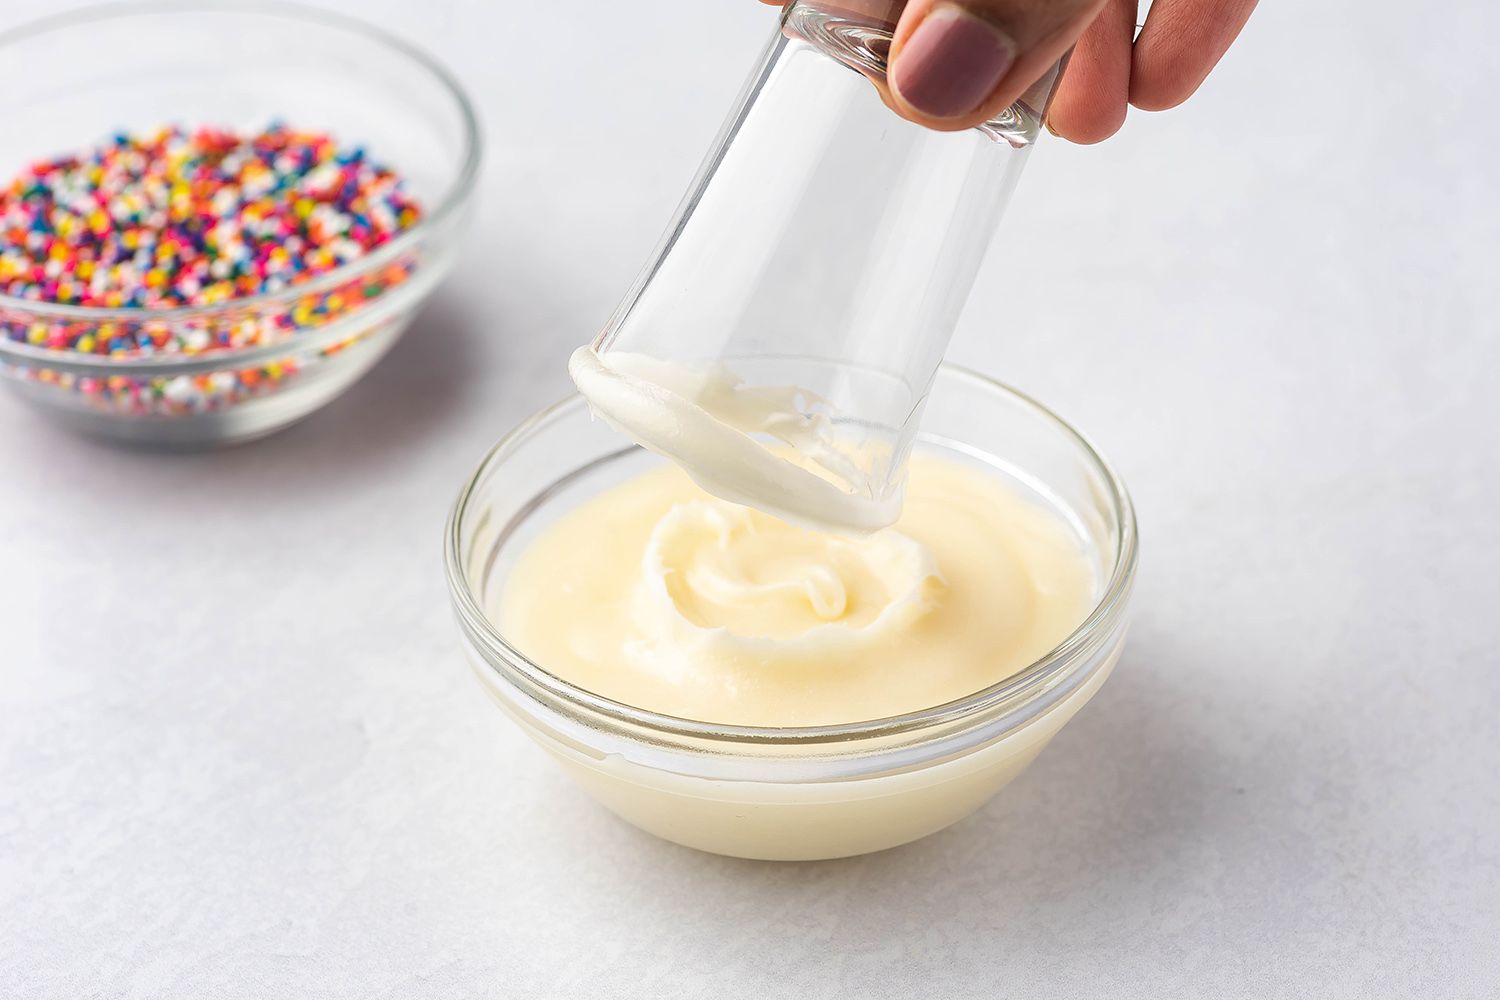 dipping shot glass in frosting